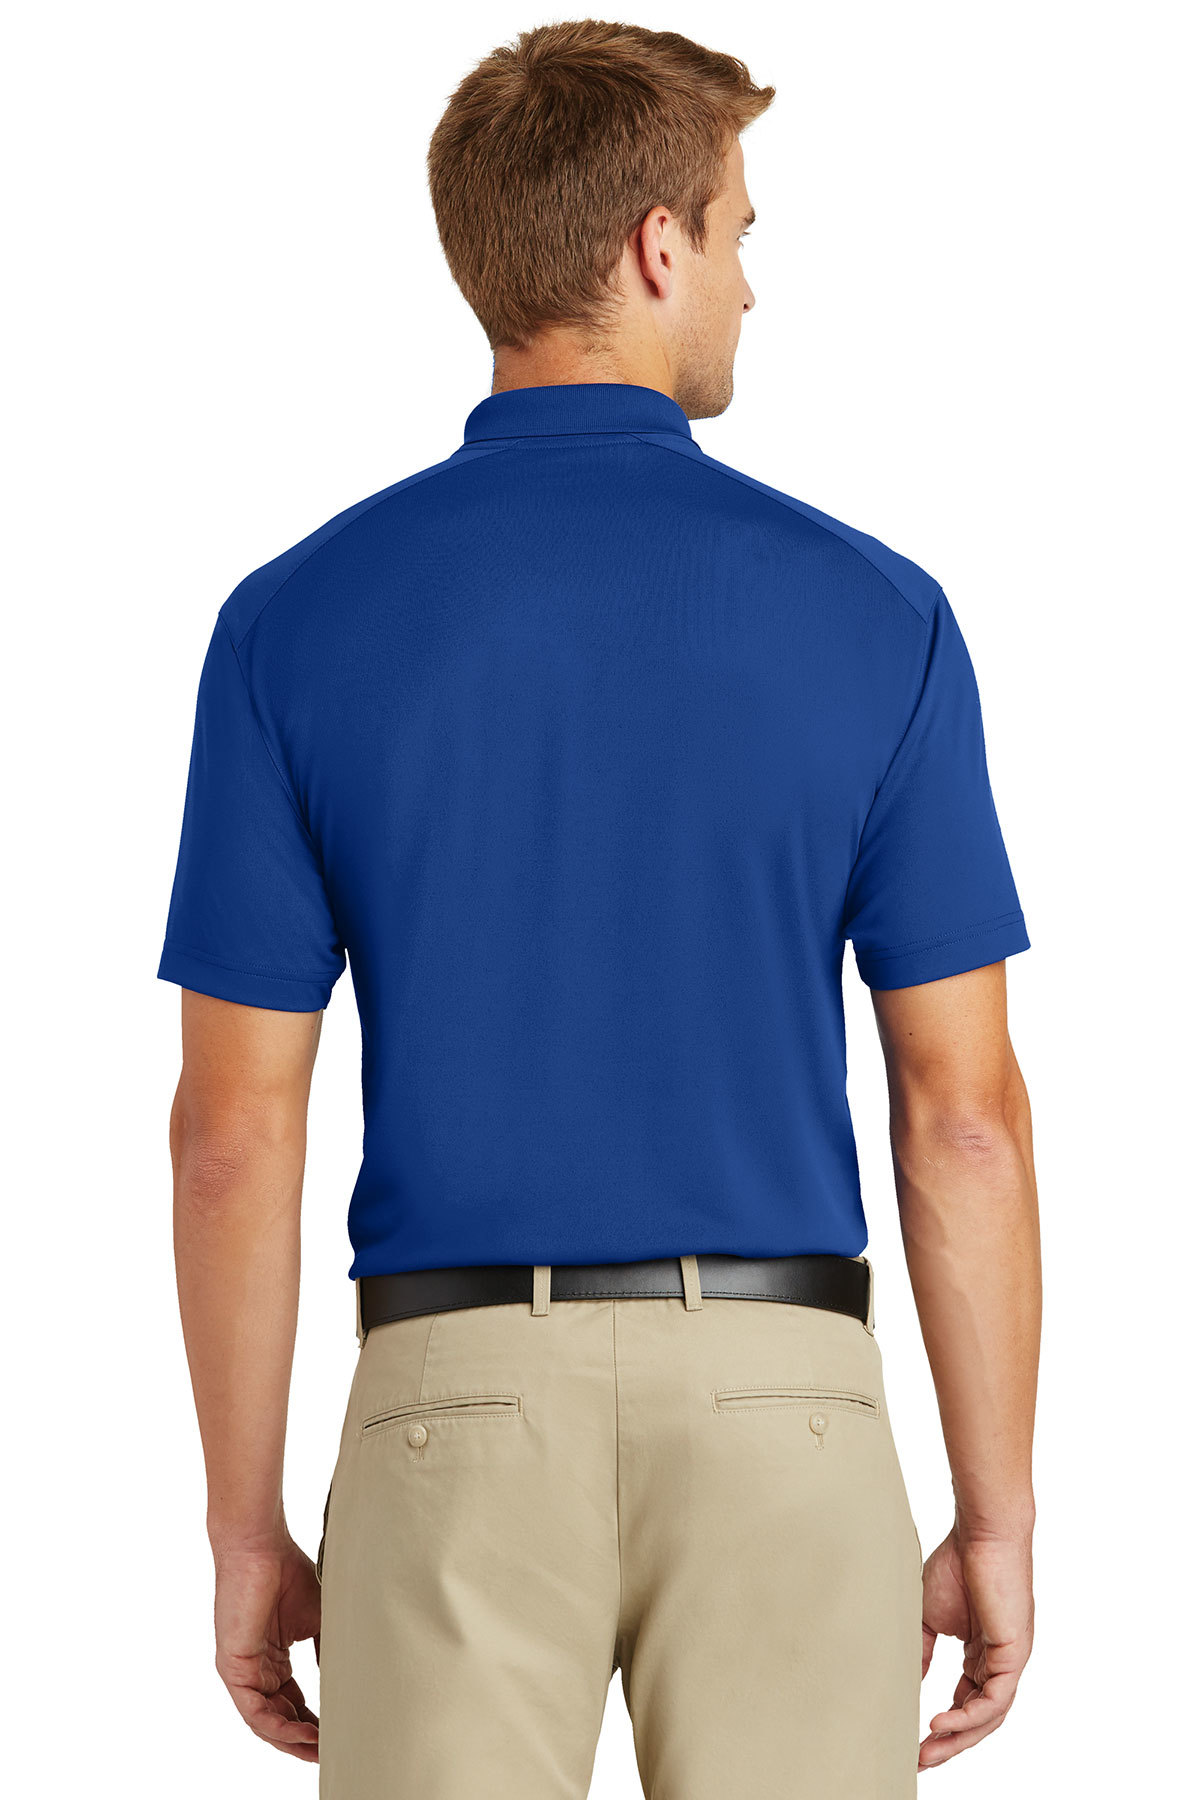 CornerStone Tall Select Lightweight Snag-Proof Polo | Product | Company ...